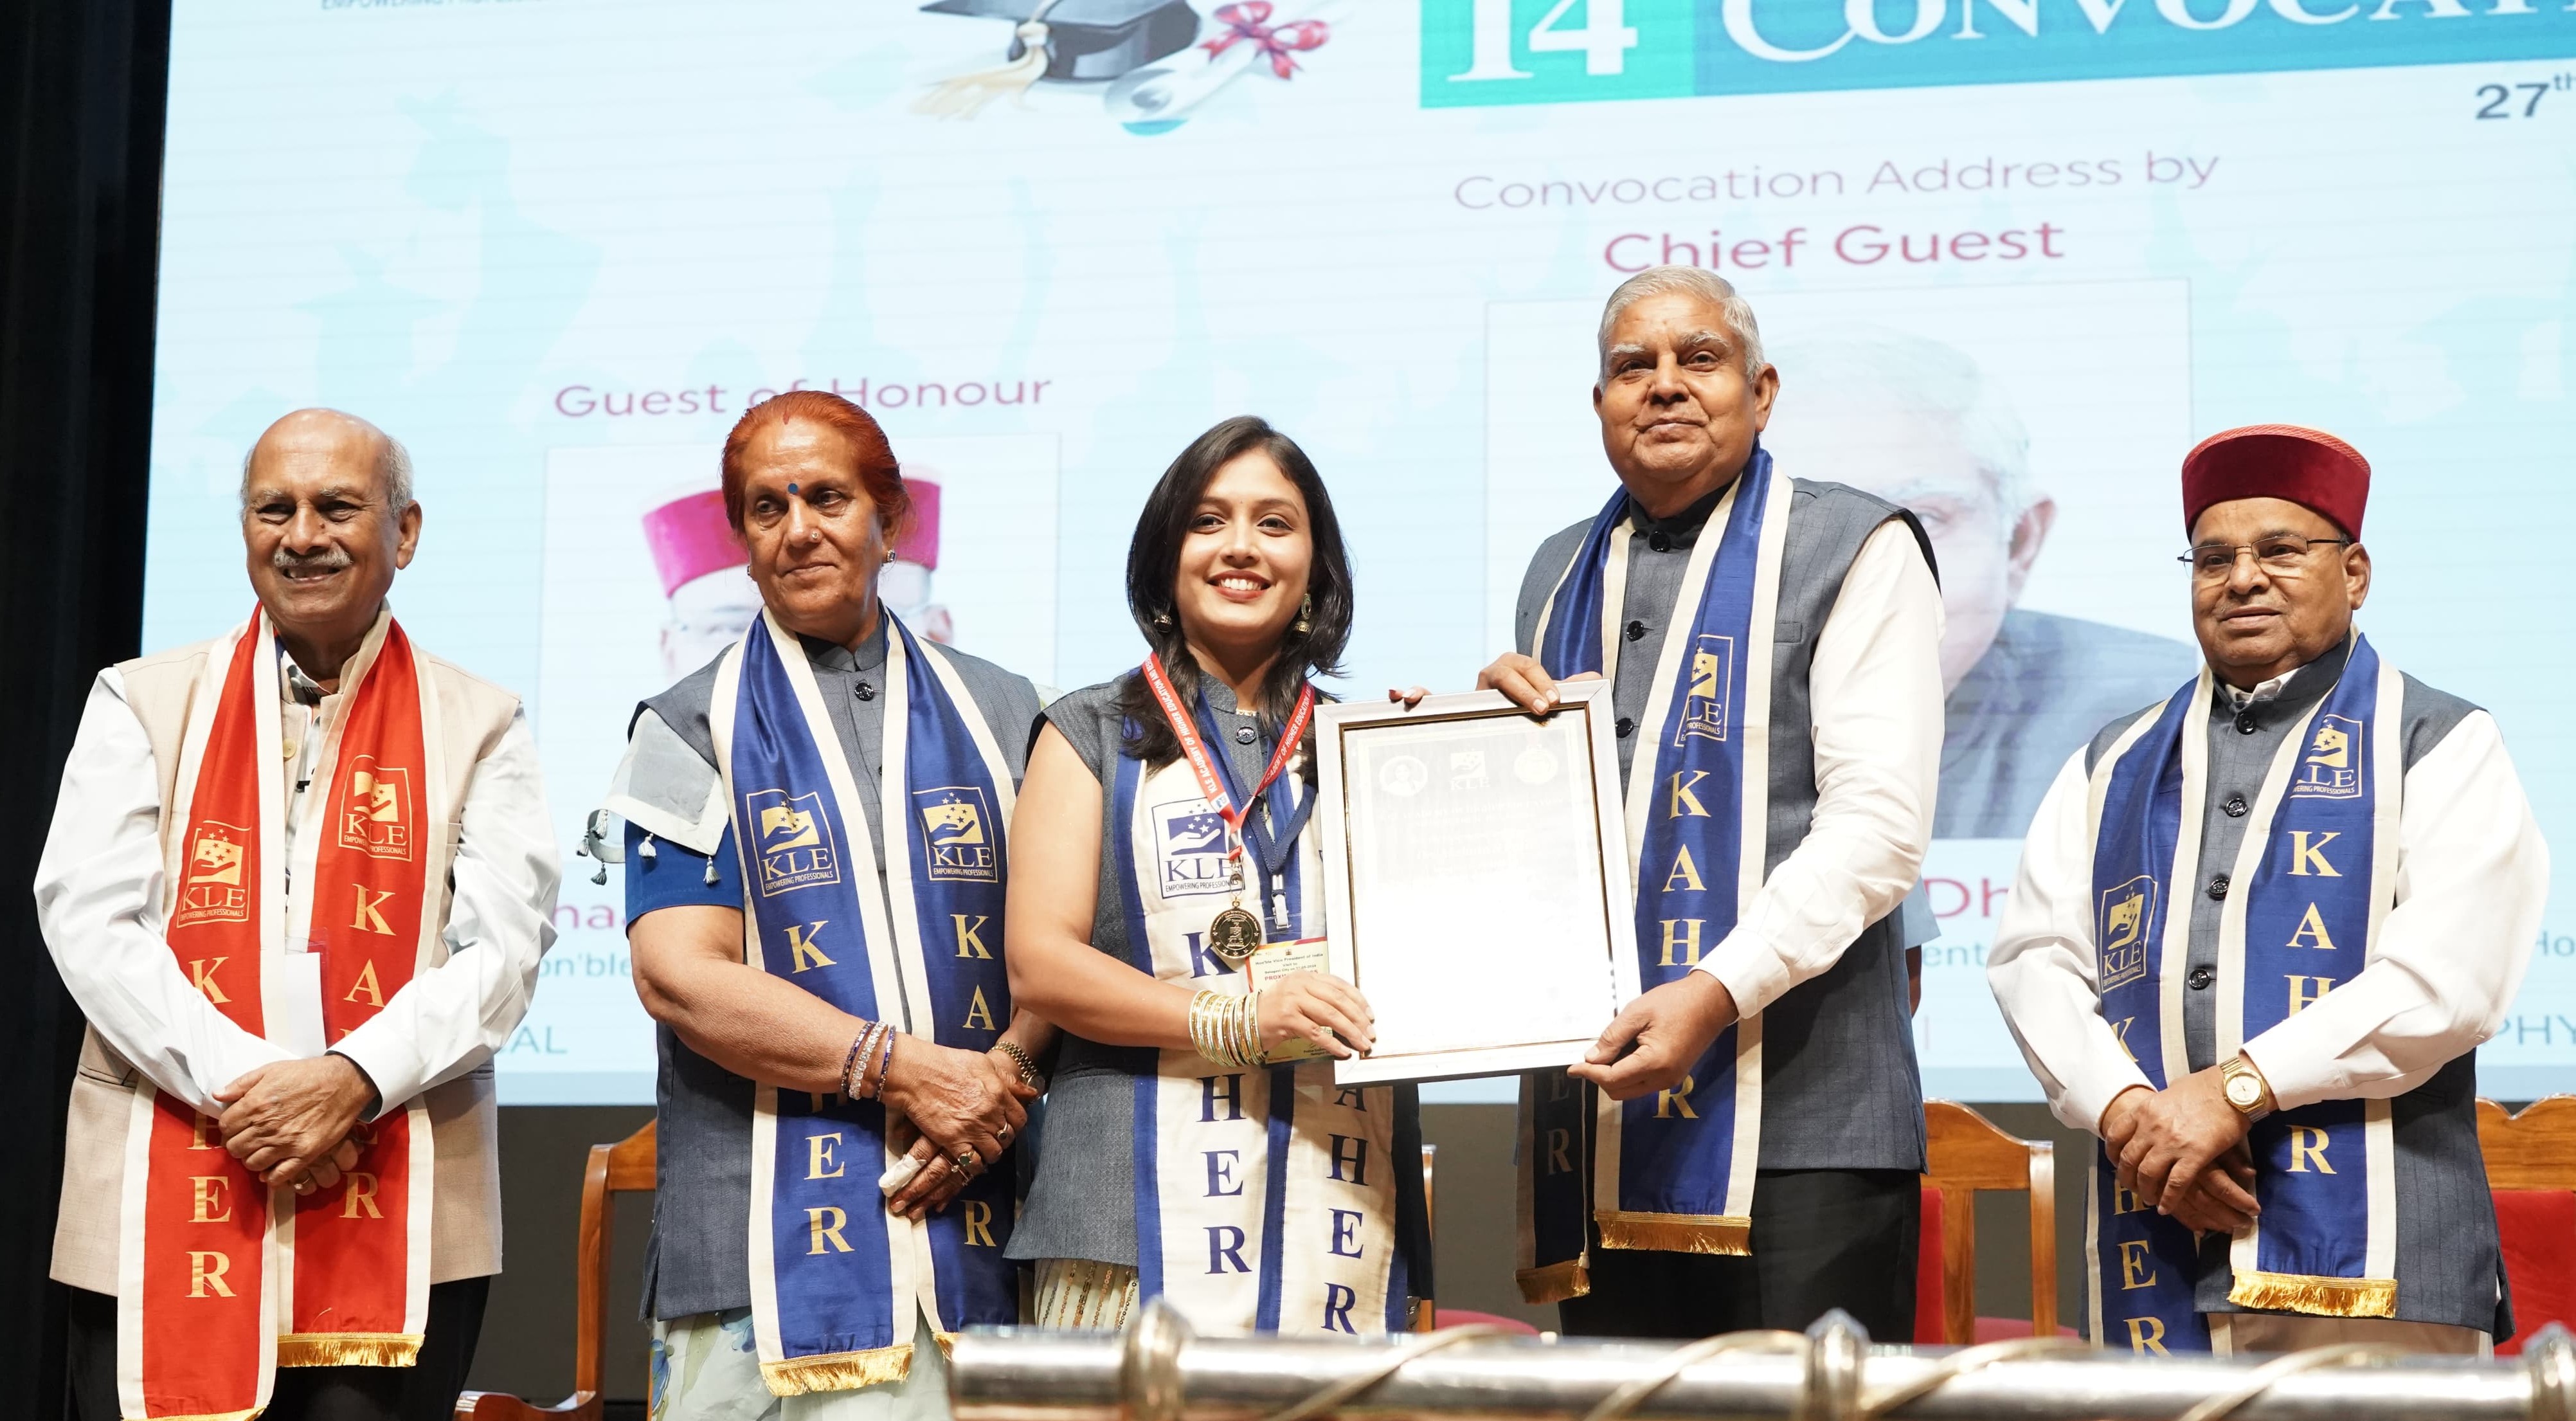 The Vice-President, Shri Jagdeep Dhankhar felicitating the gold medalists at 14th Convocation Ceremony of KLE Academy of Higher Education & Research in Belagavi, Karnataka on May 27, 2024.